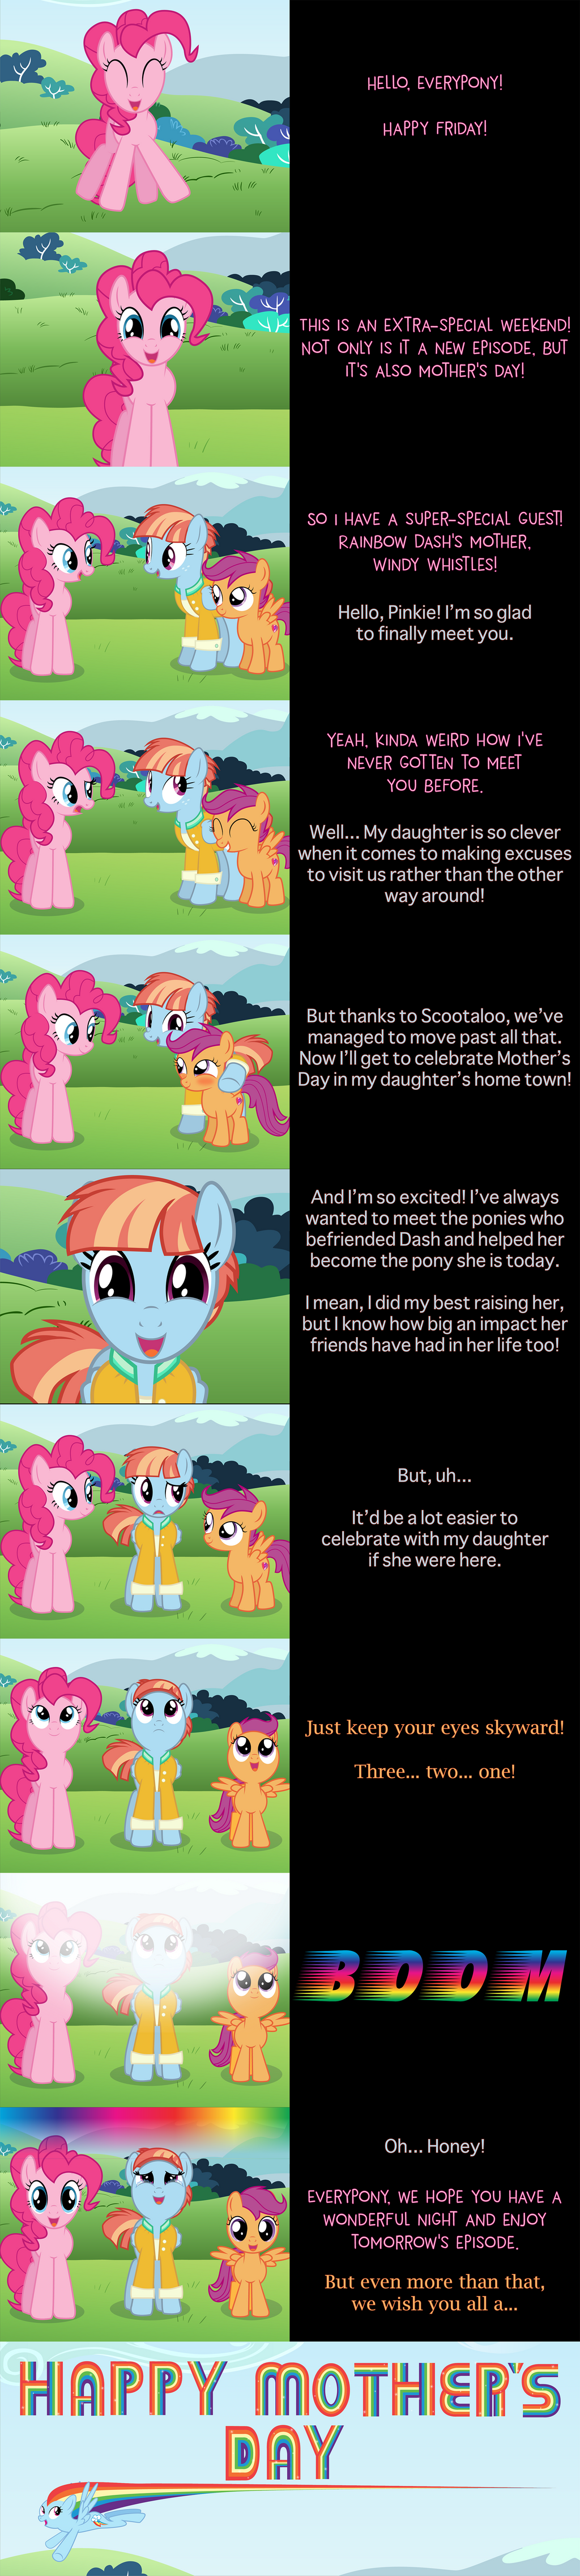 Pinkie Pie Says Goodnight: Mother's Day Wishes